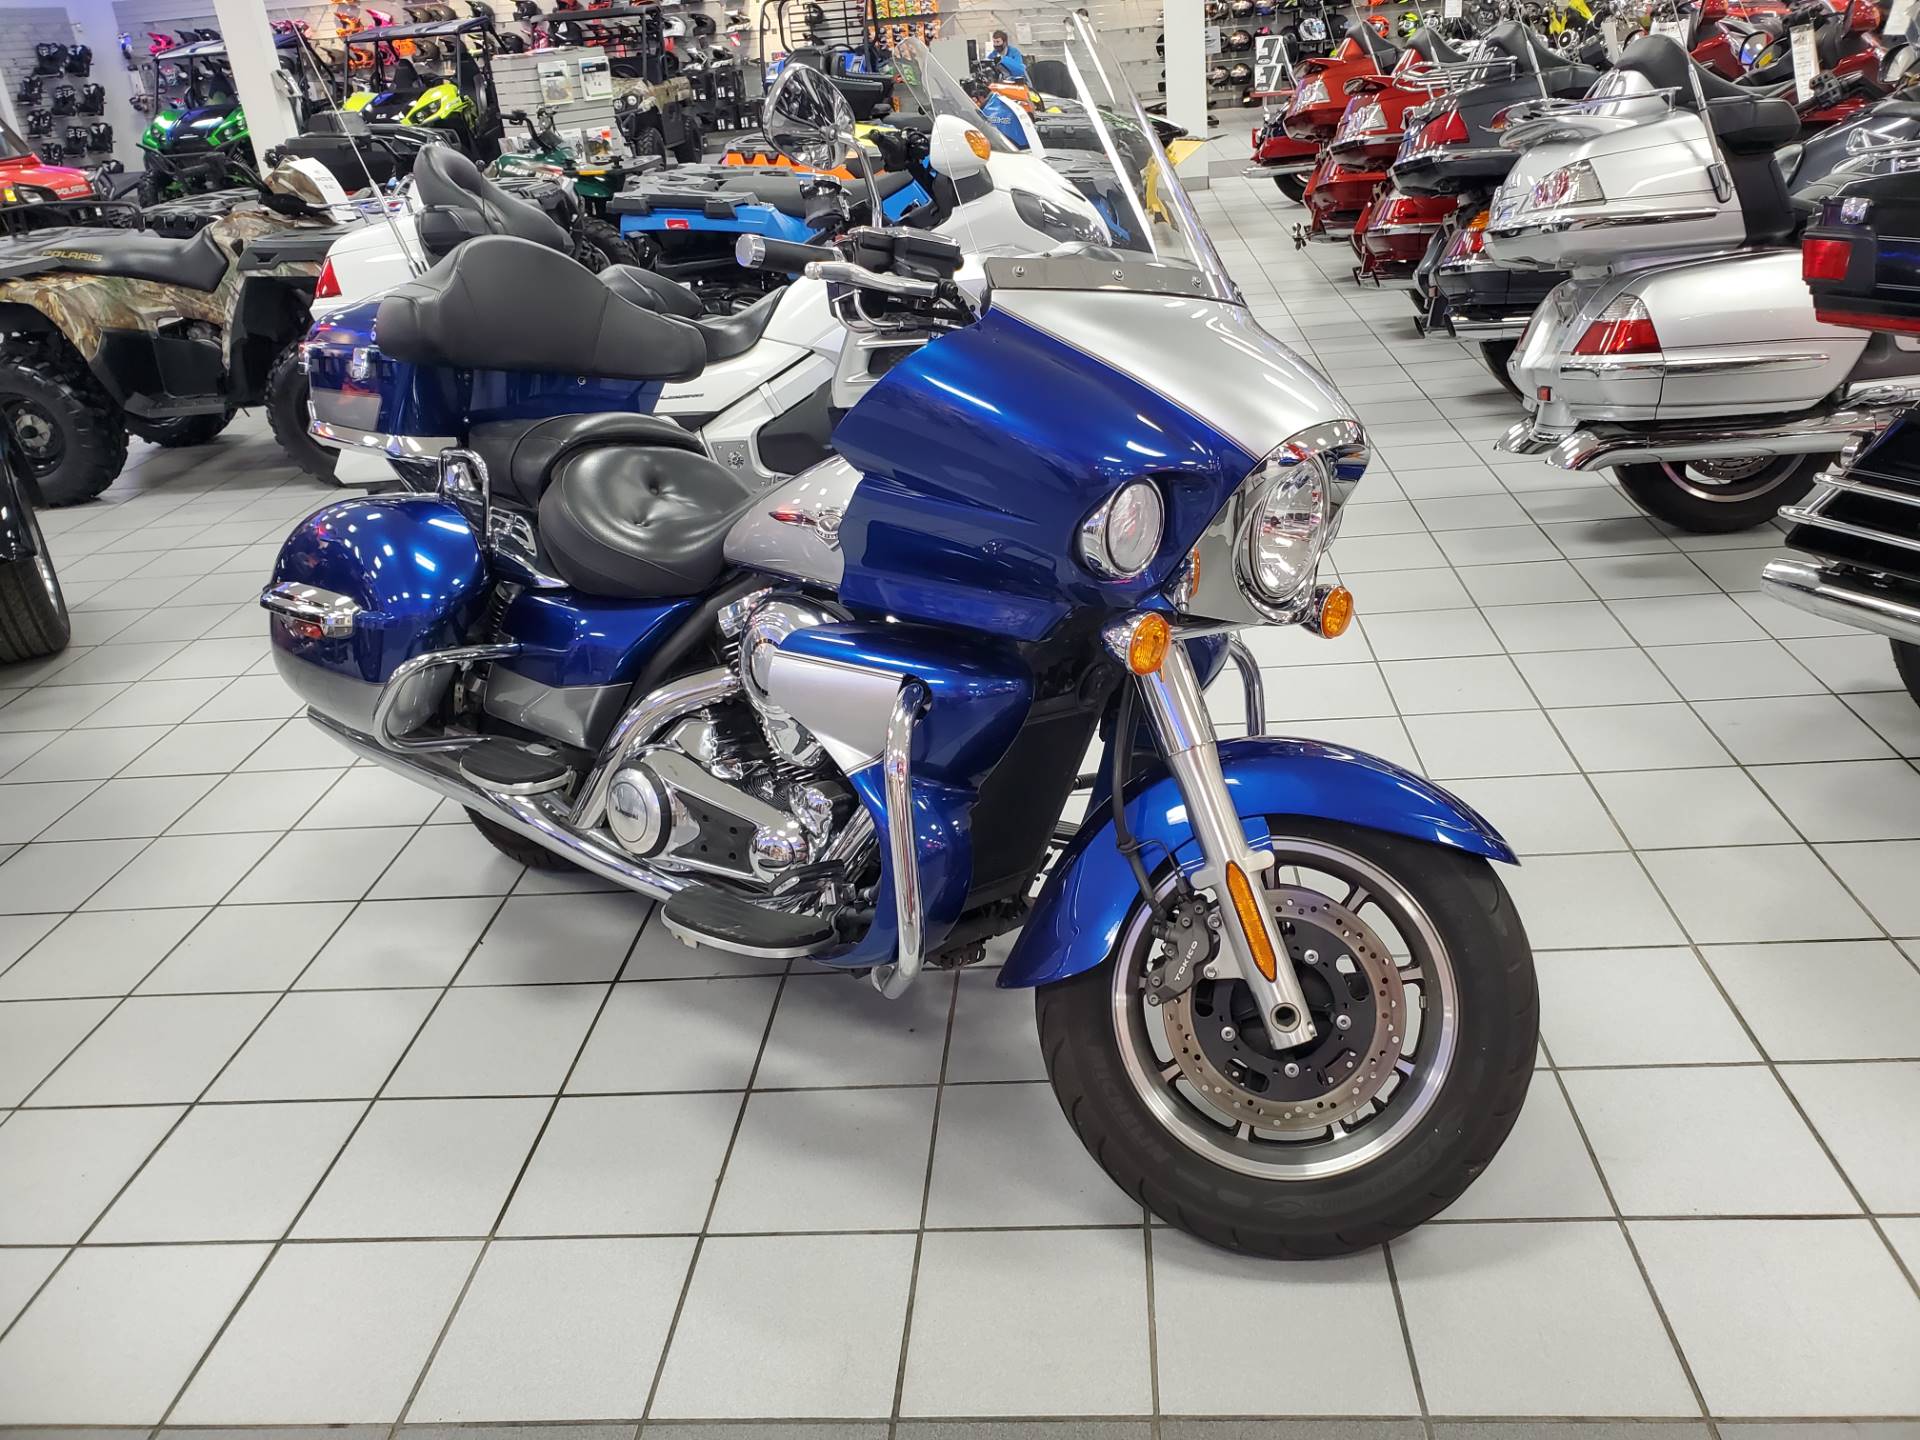 Used 2011 Vulcan® 1700 Voyager® | Motorcycles in Kaukauna WI | 006258 Imperial Blue / Atomic Silver